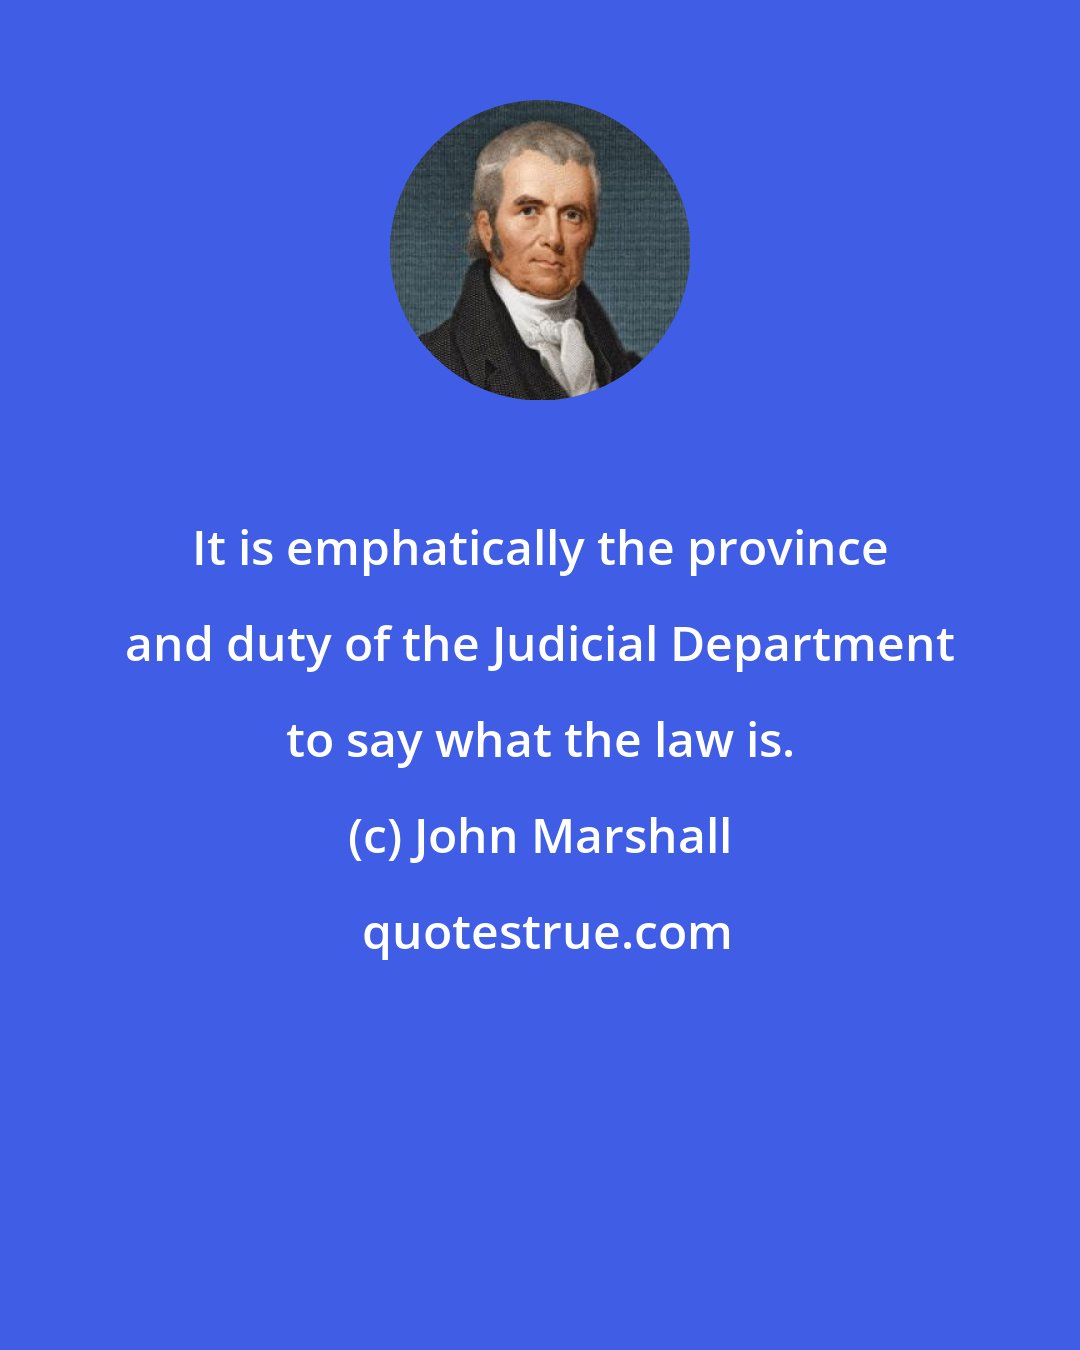 John Marshall: It is emphatically the province and duty of the Judicial Department to say what the law is.